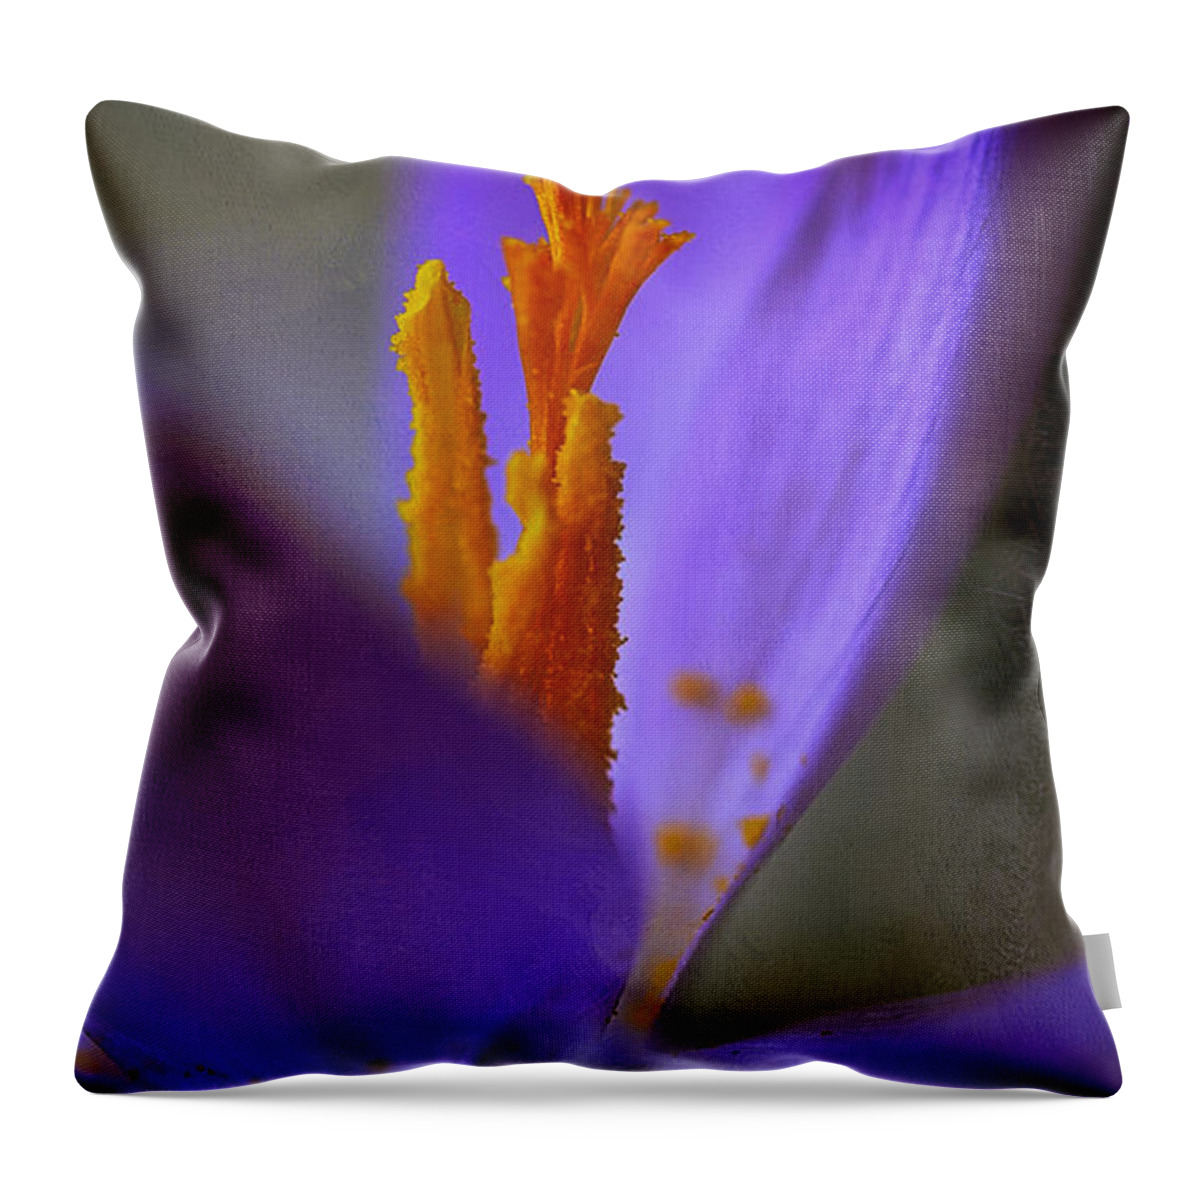 Crocus Throw Pillow featuring the photograph Looking Up To Spring by Rene Crystal